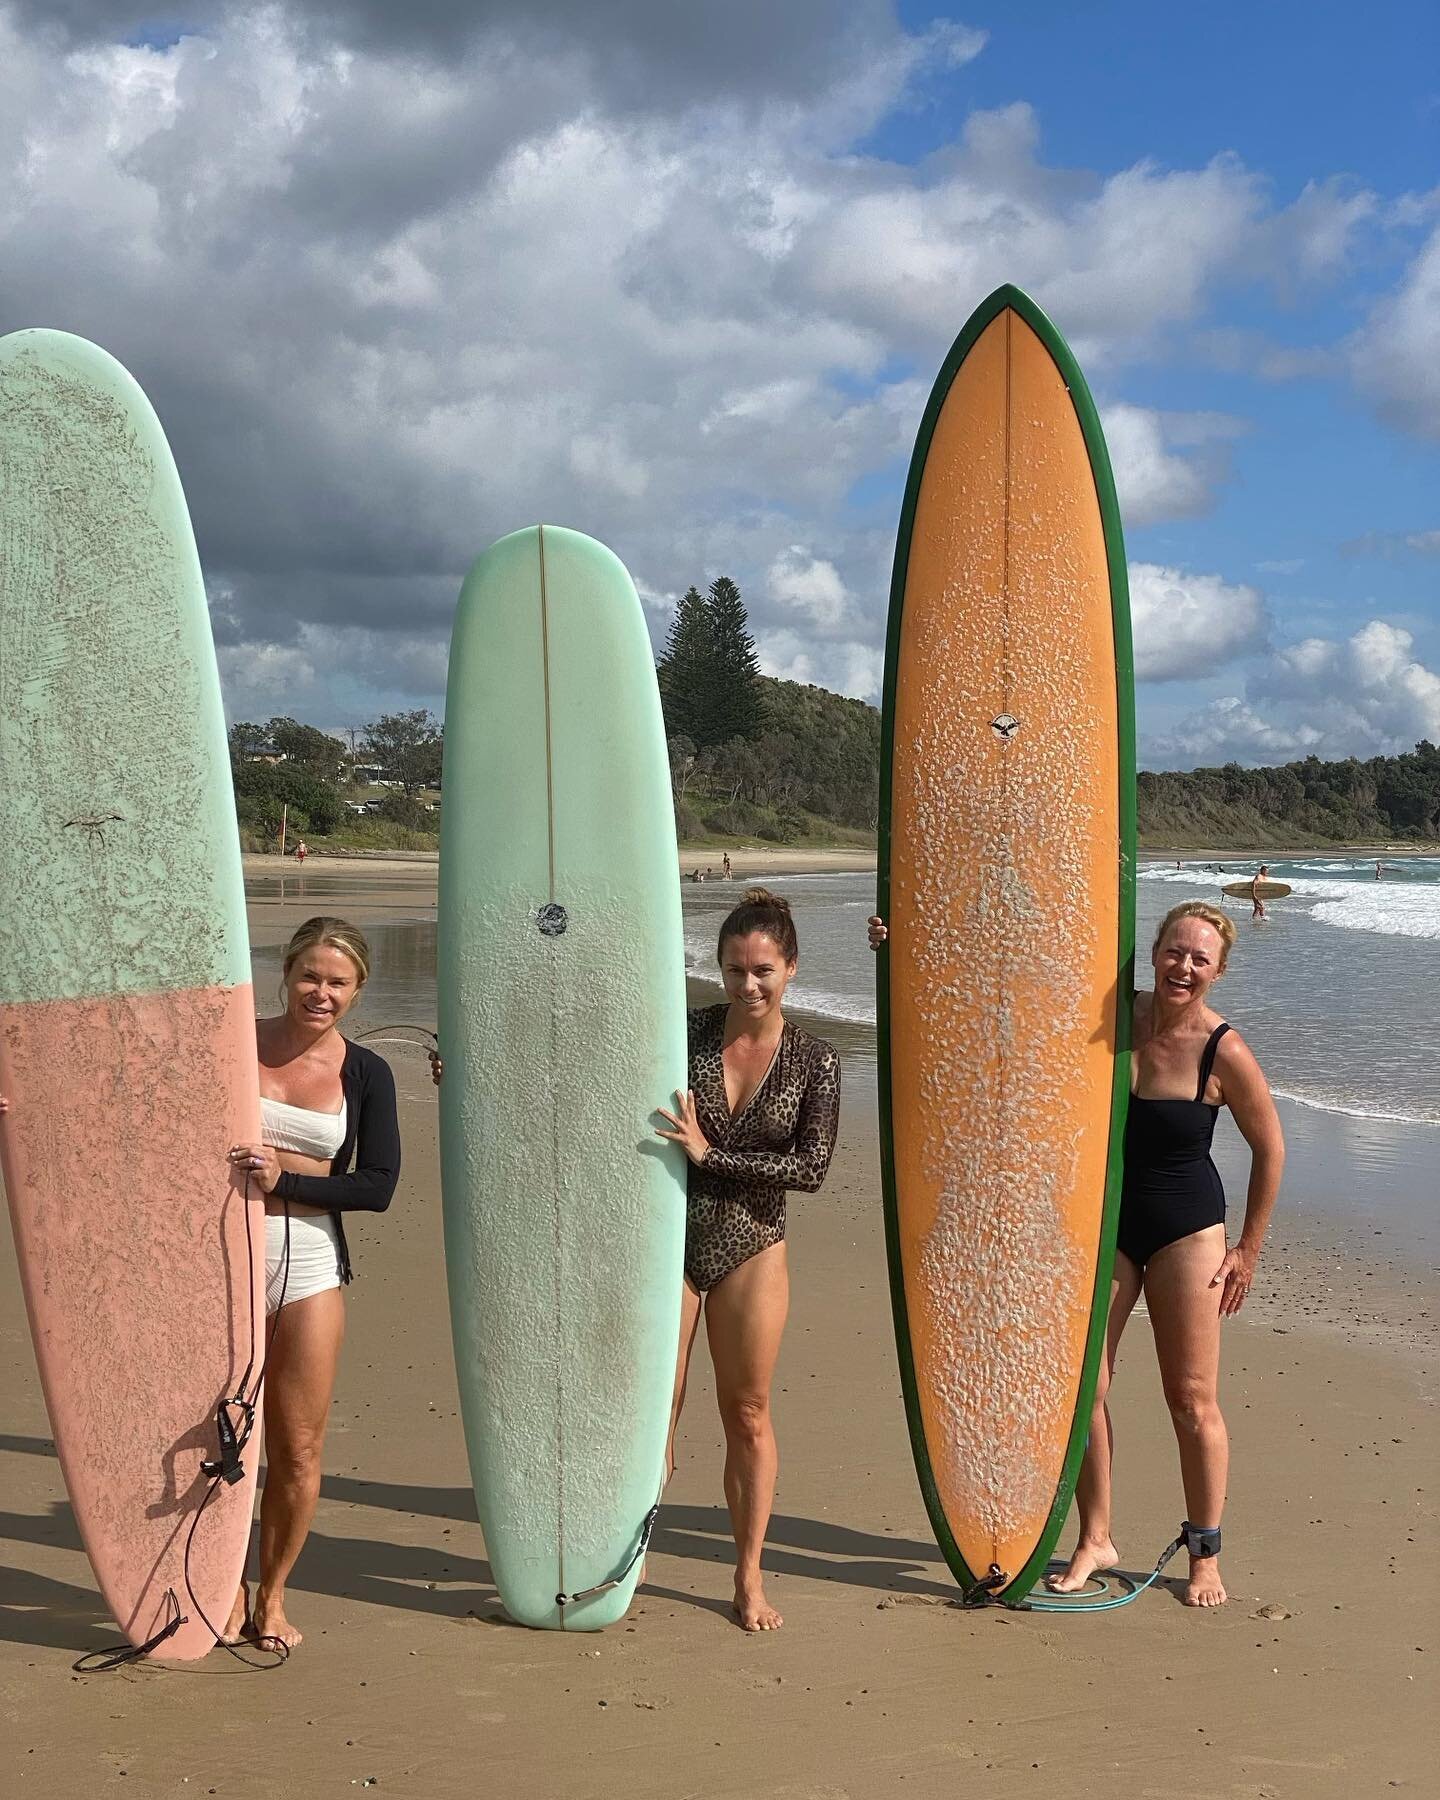 This needs a permanent spot on the &lsquo;gram. 

Mums heading out for a surf 🏄🏻&zwj;♀️ 

Shredding with @k_andkids @shelleycraftofficial 

Only took until the last day of the holiday to get us out there! The best hour of the whole summer holiday ?